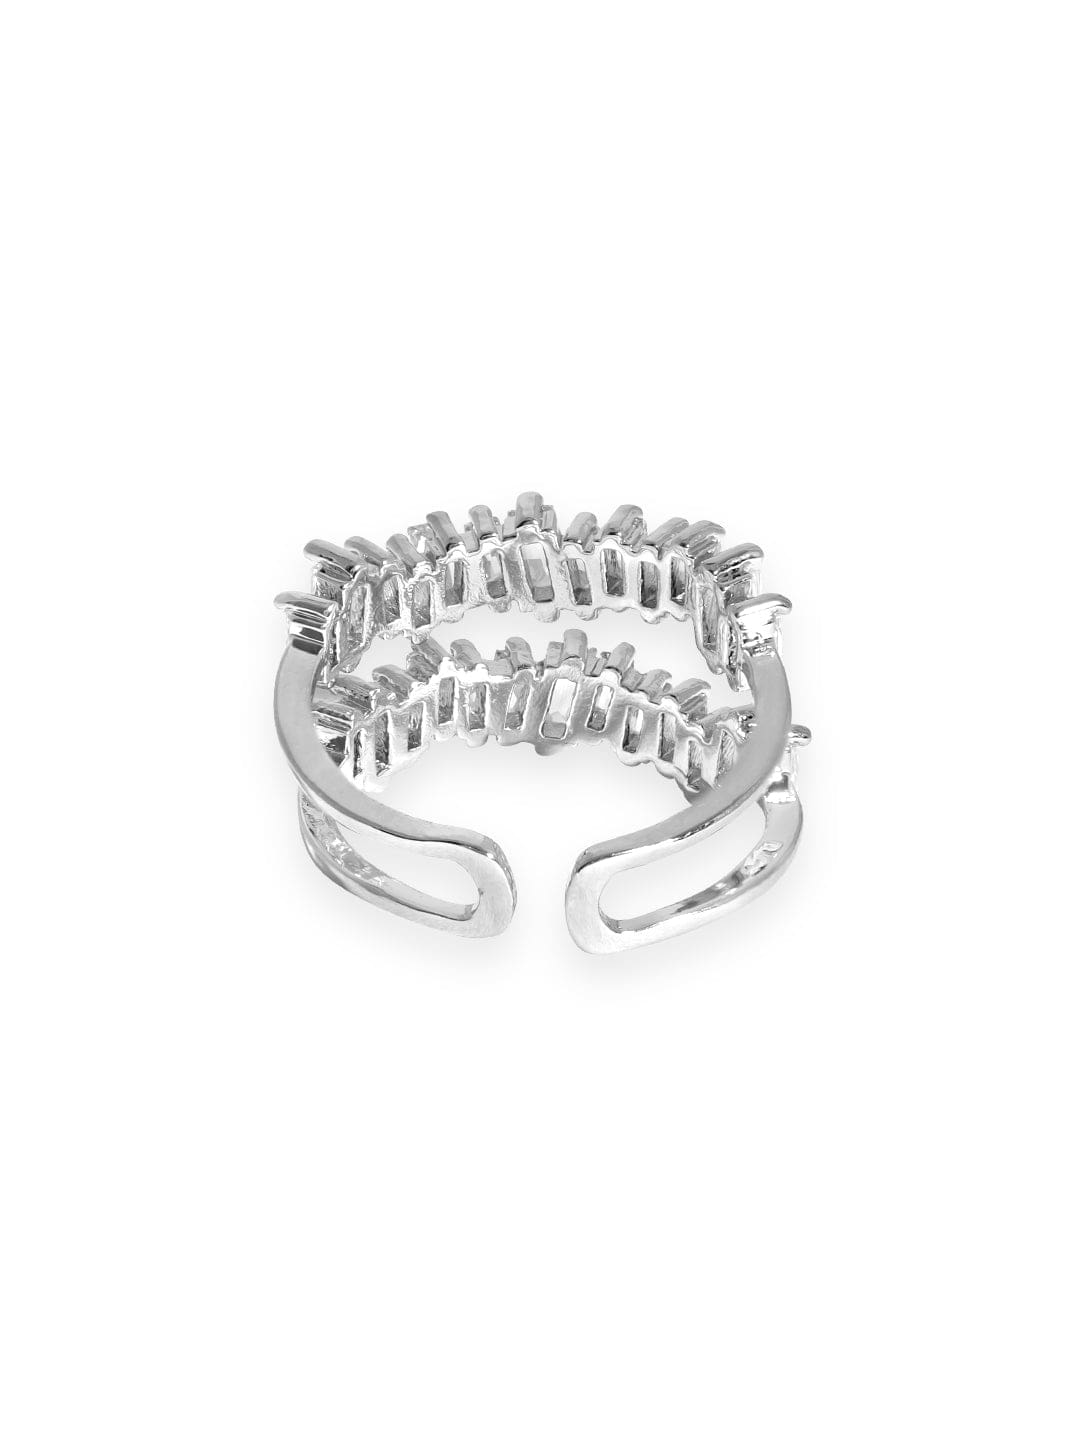 Rubans Elegance Unbound: Adjustable AD Silver Tone Ring Rings